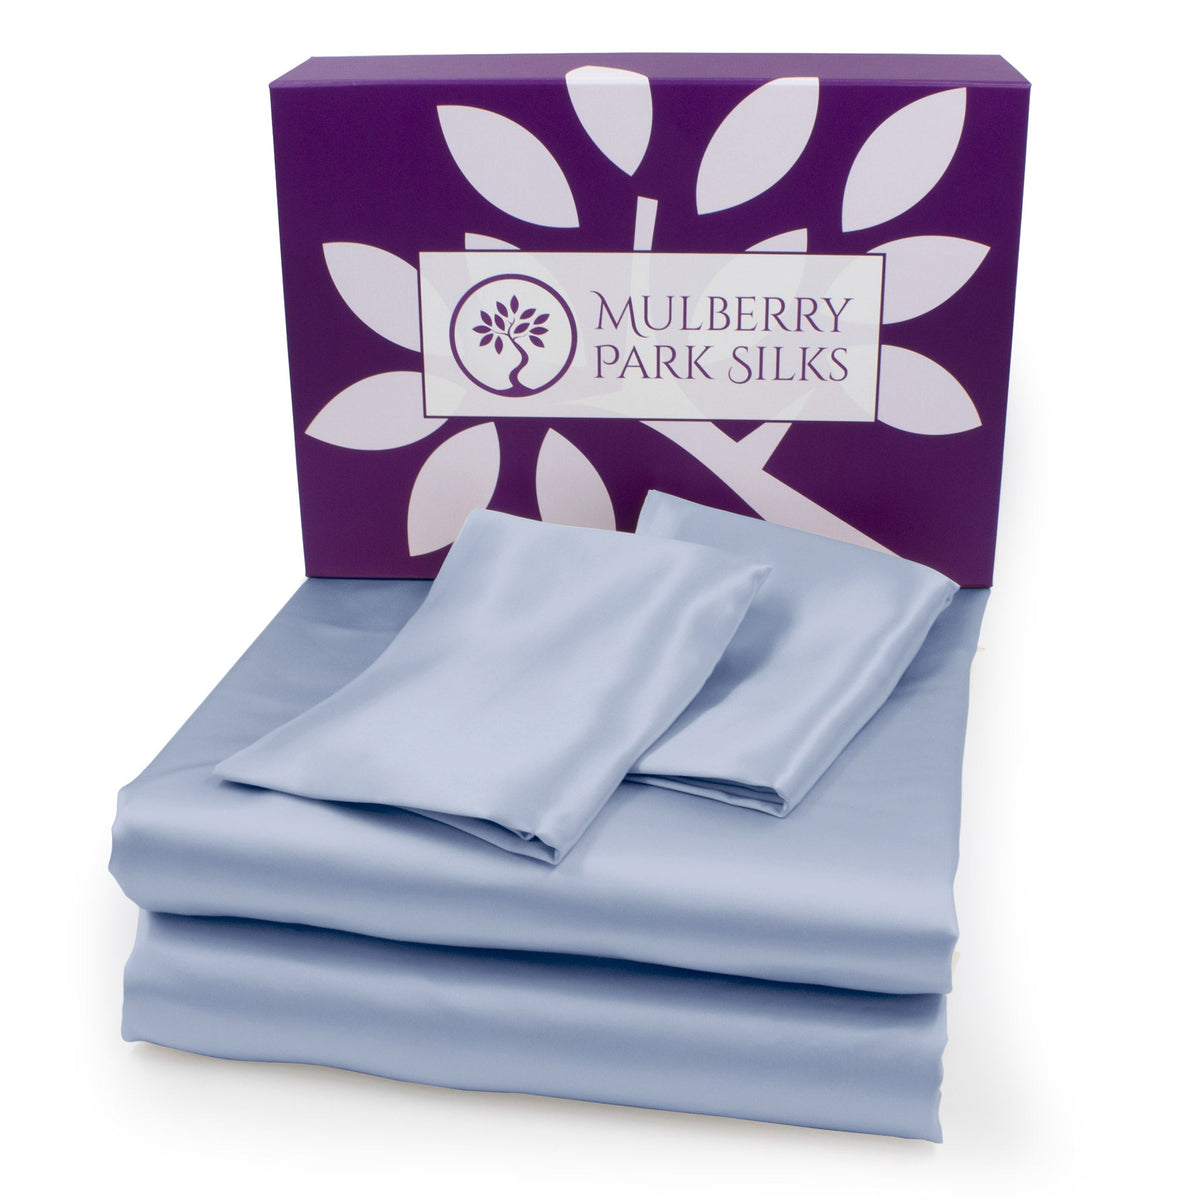 Mulberry Park Silks 22 Momme Silk Sheet Sets Blue Steel with Giftbox